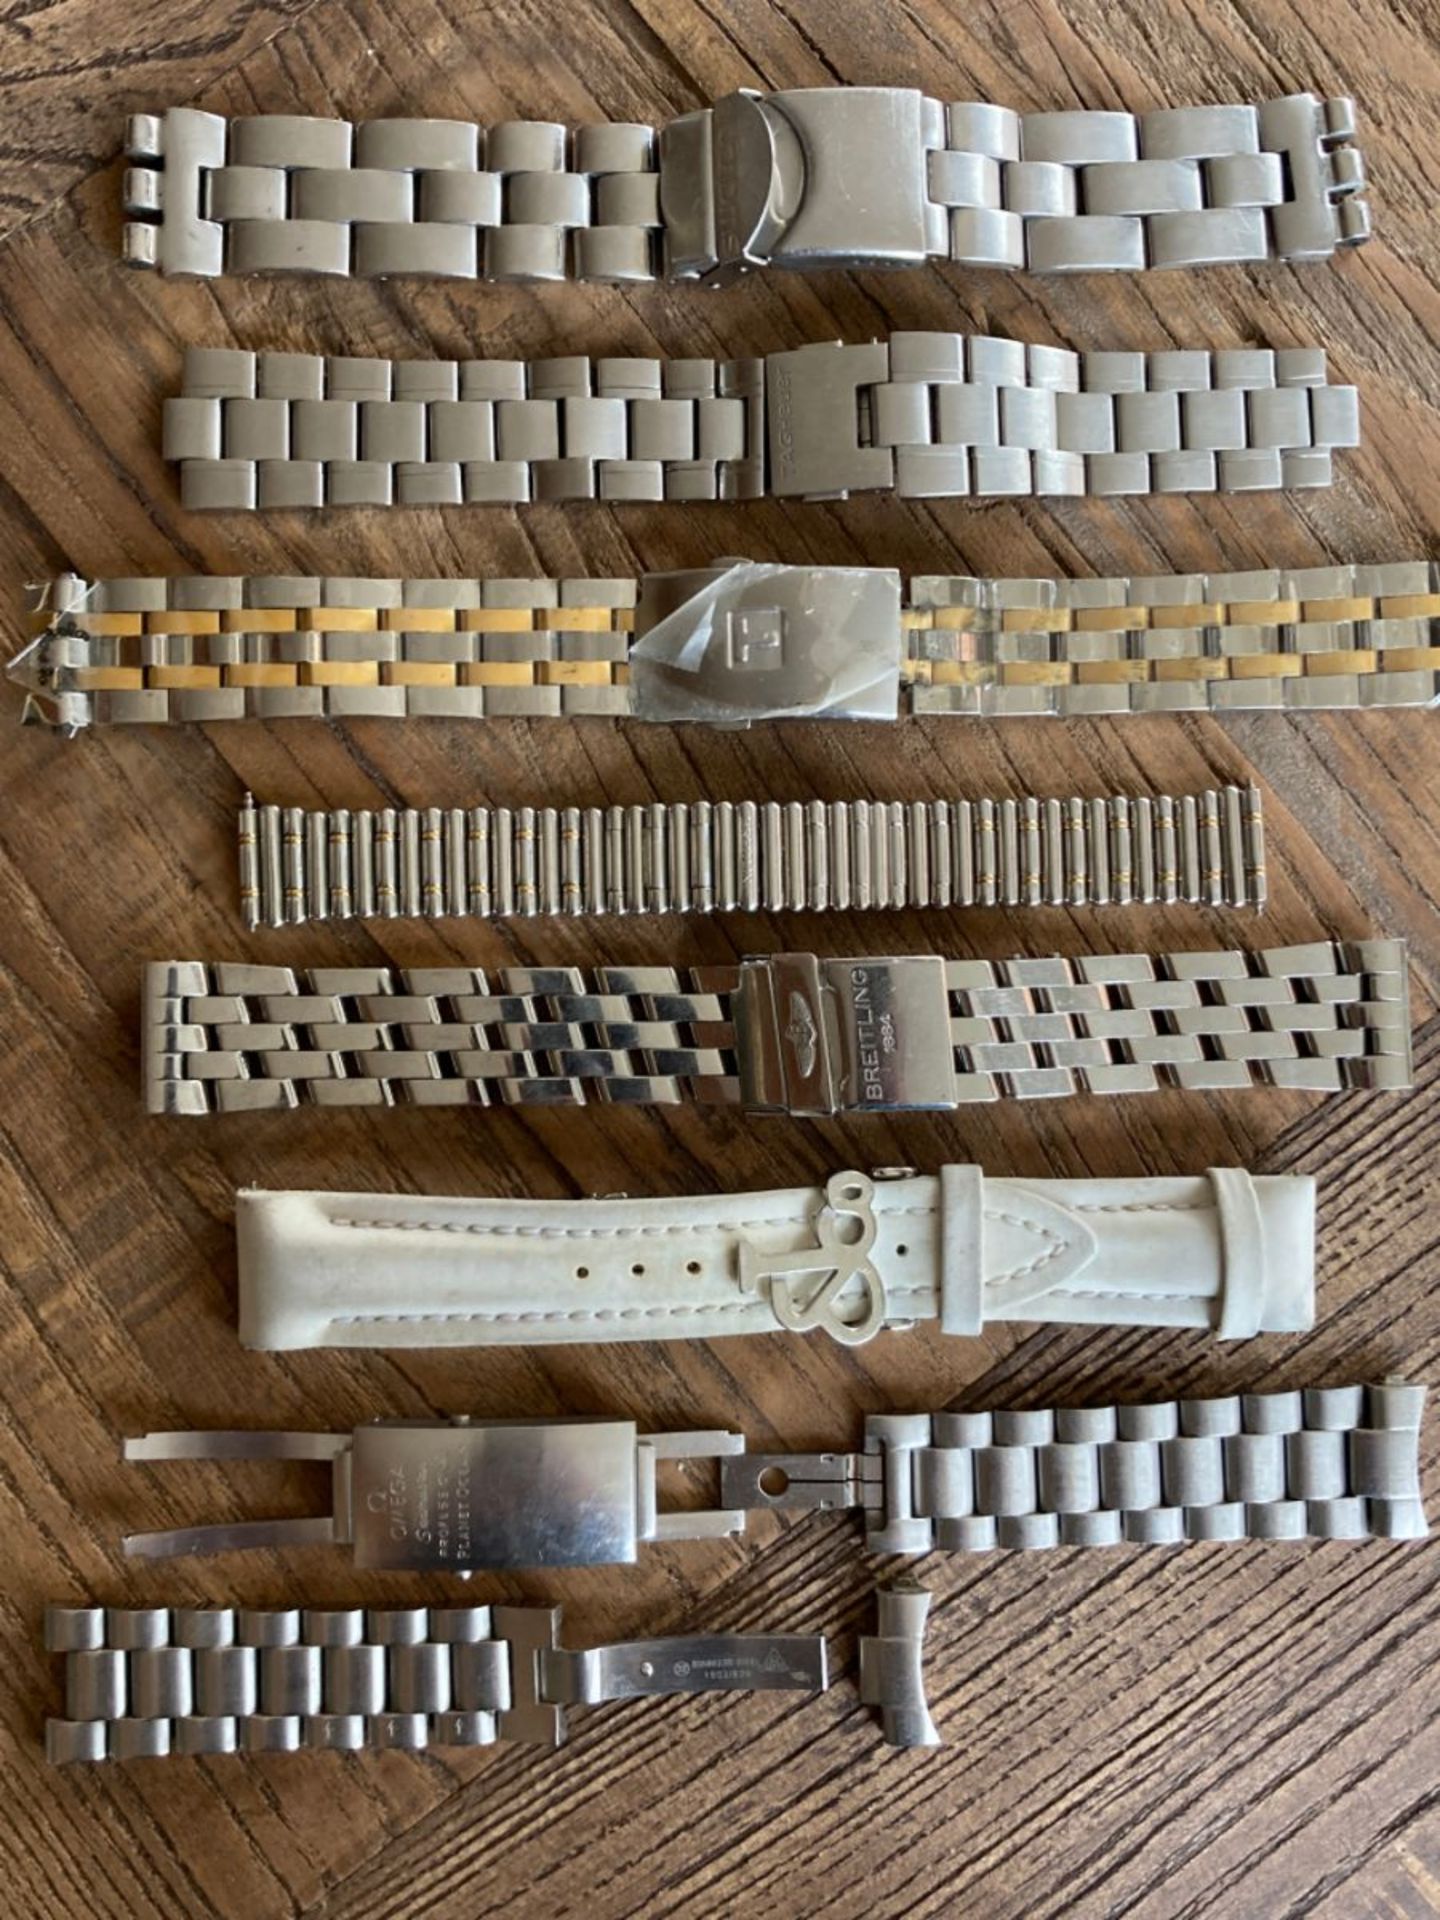 WATCH BRACELETS - BREITLING, OMEGA, JACOB AND CO, TAG HEUER